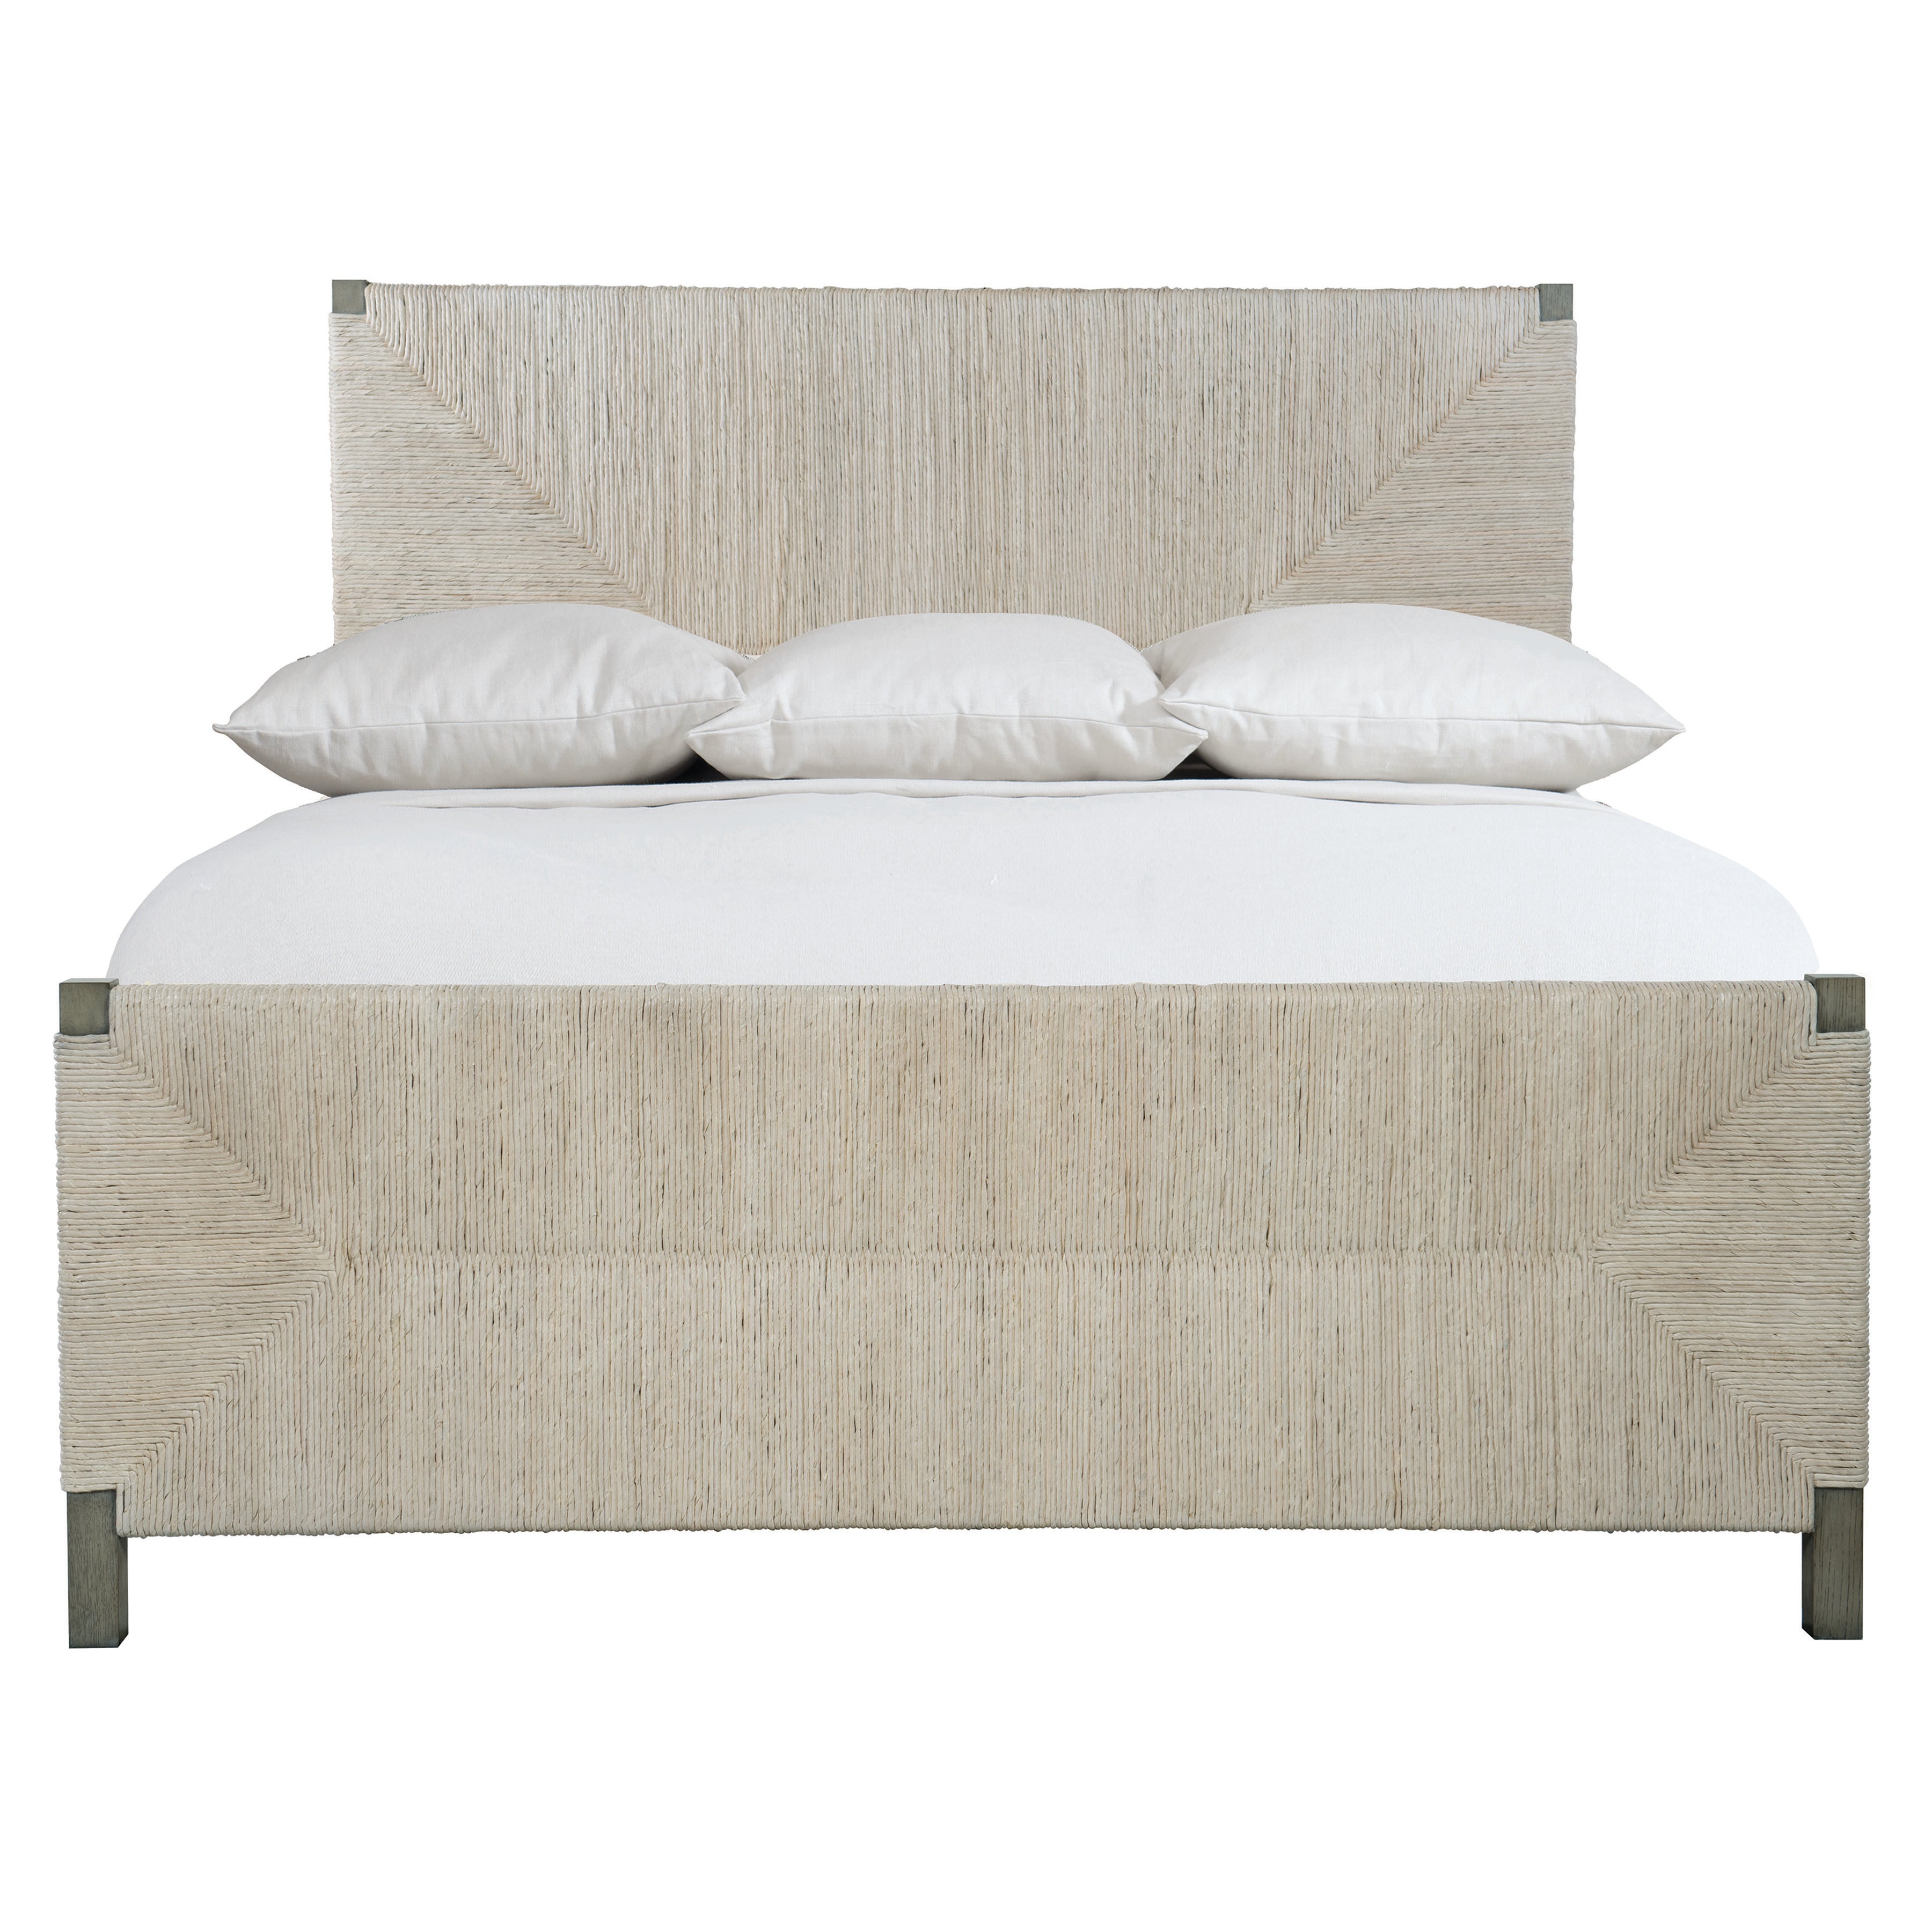 Alannis King Woven Panel Bed